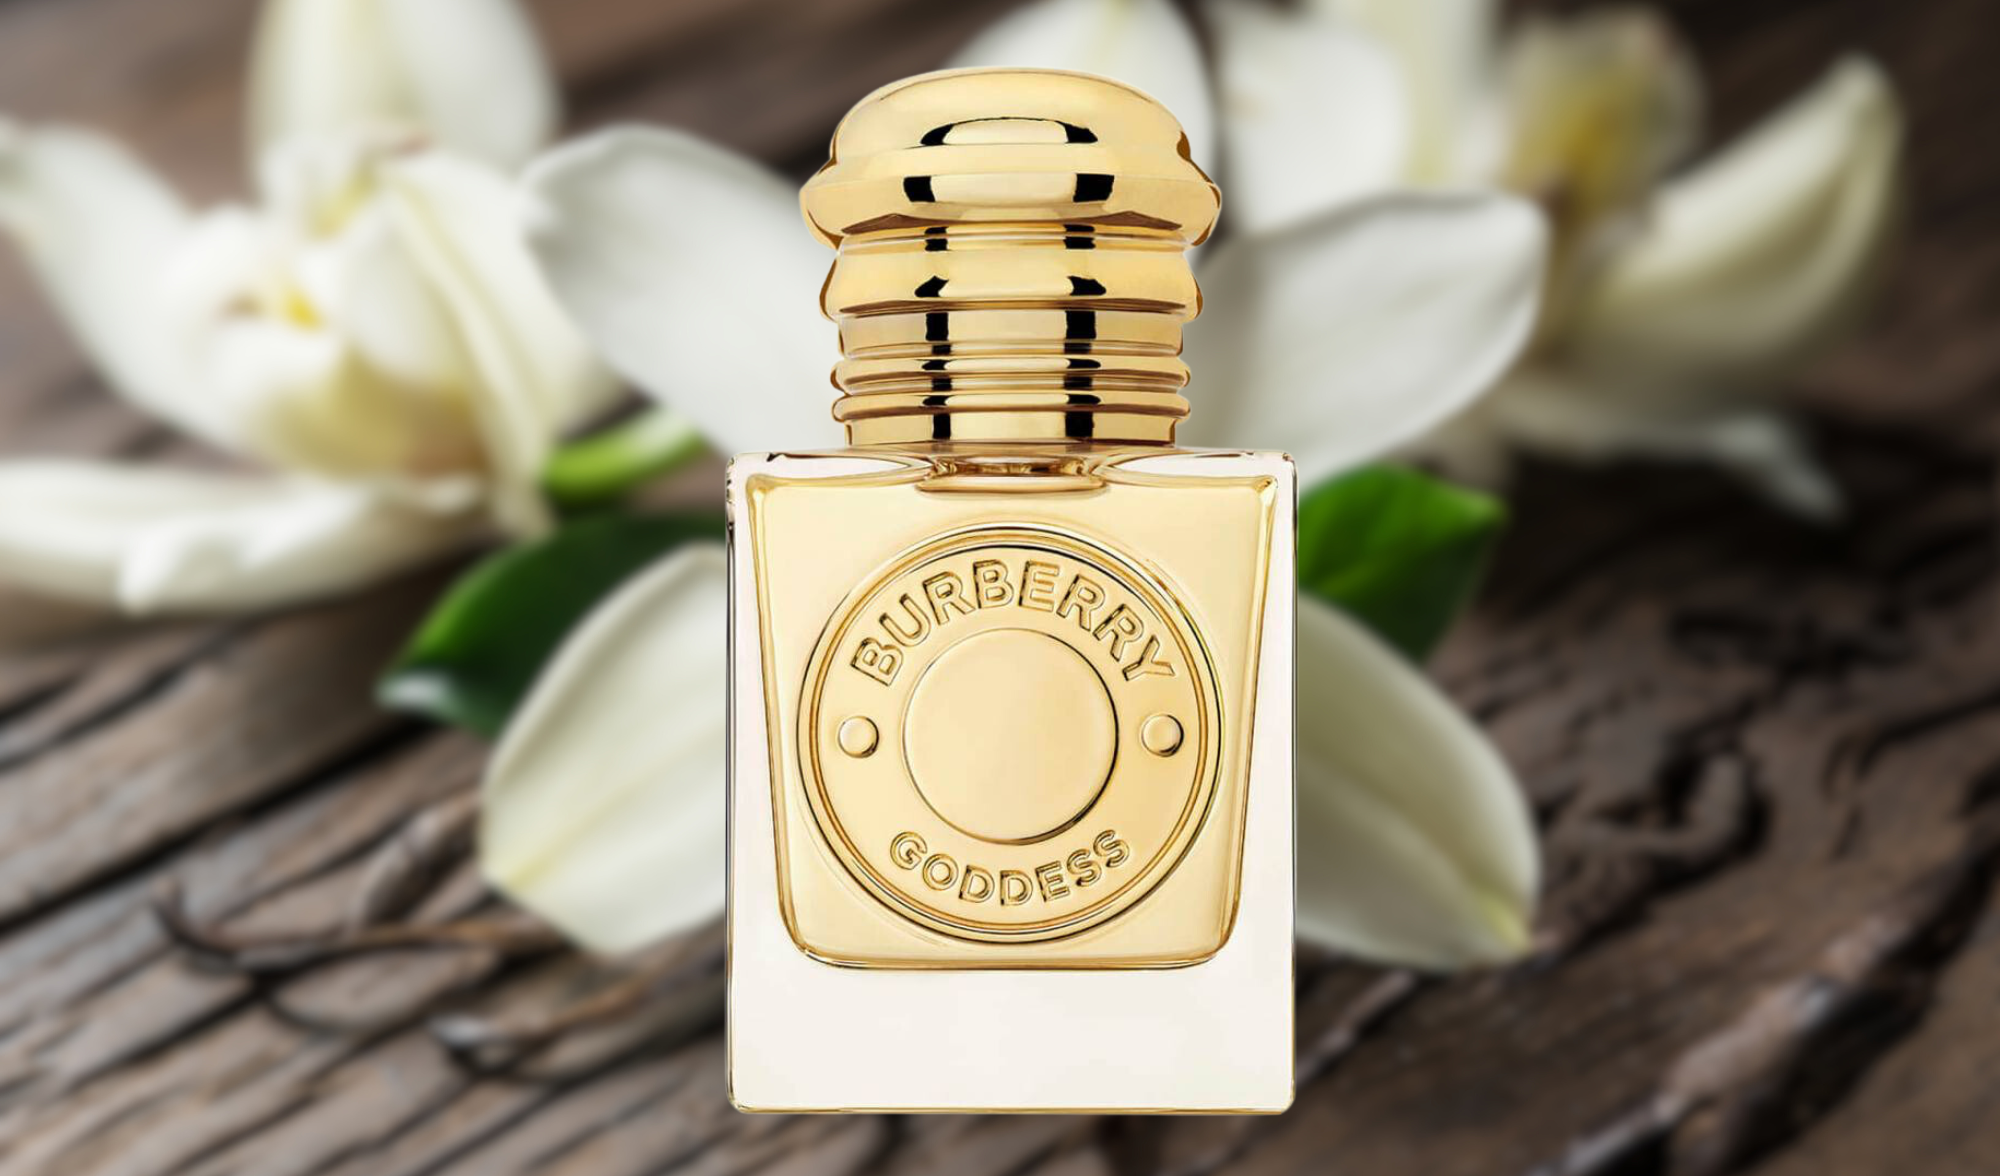 What Does The New Burberry Goddess Smell Like?